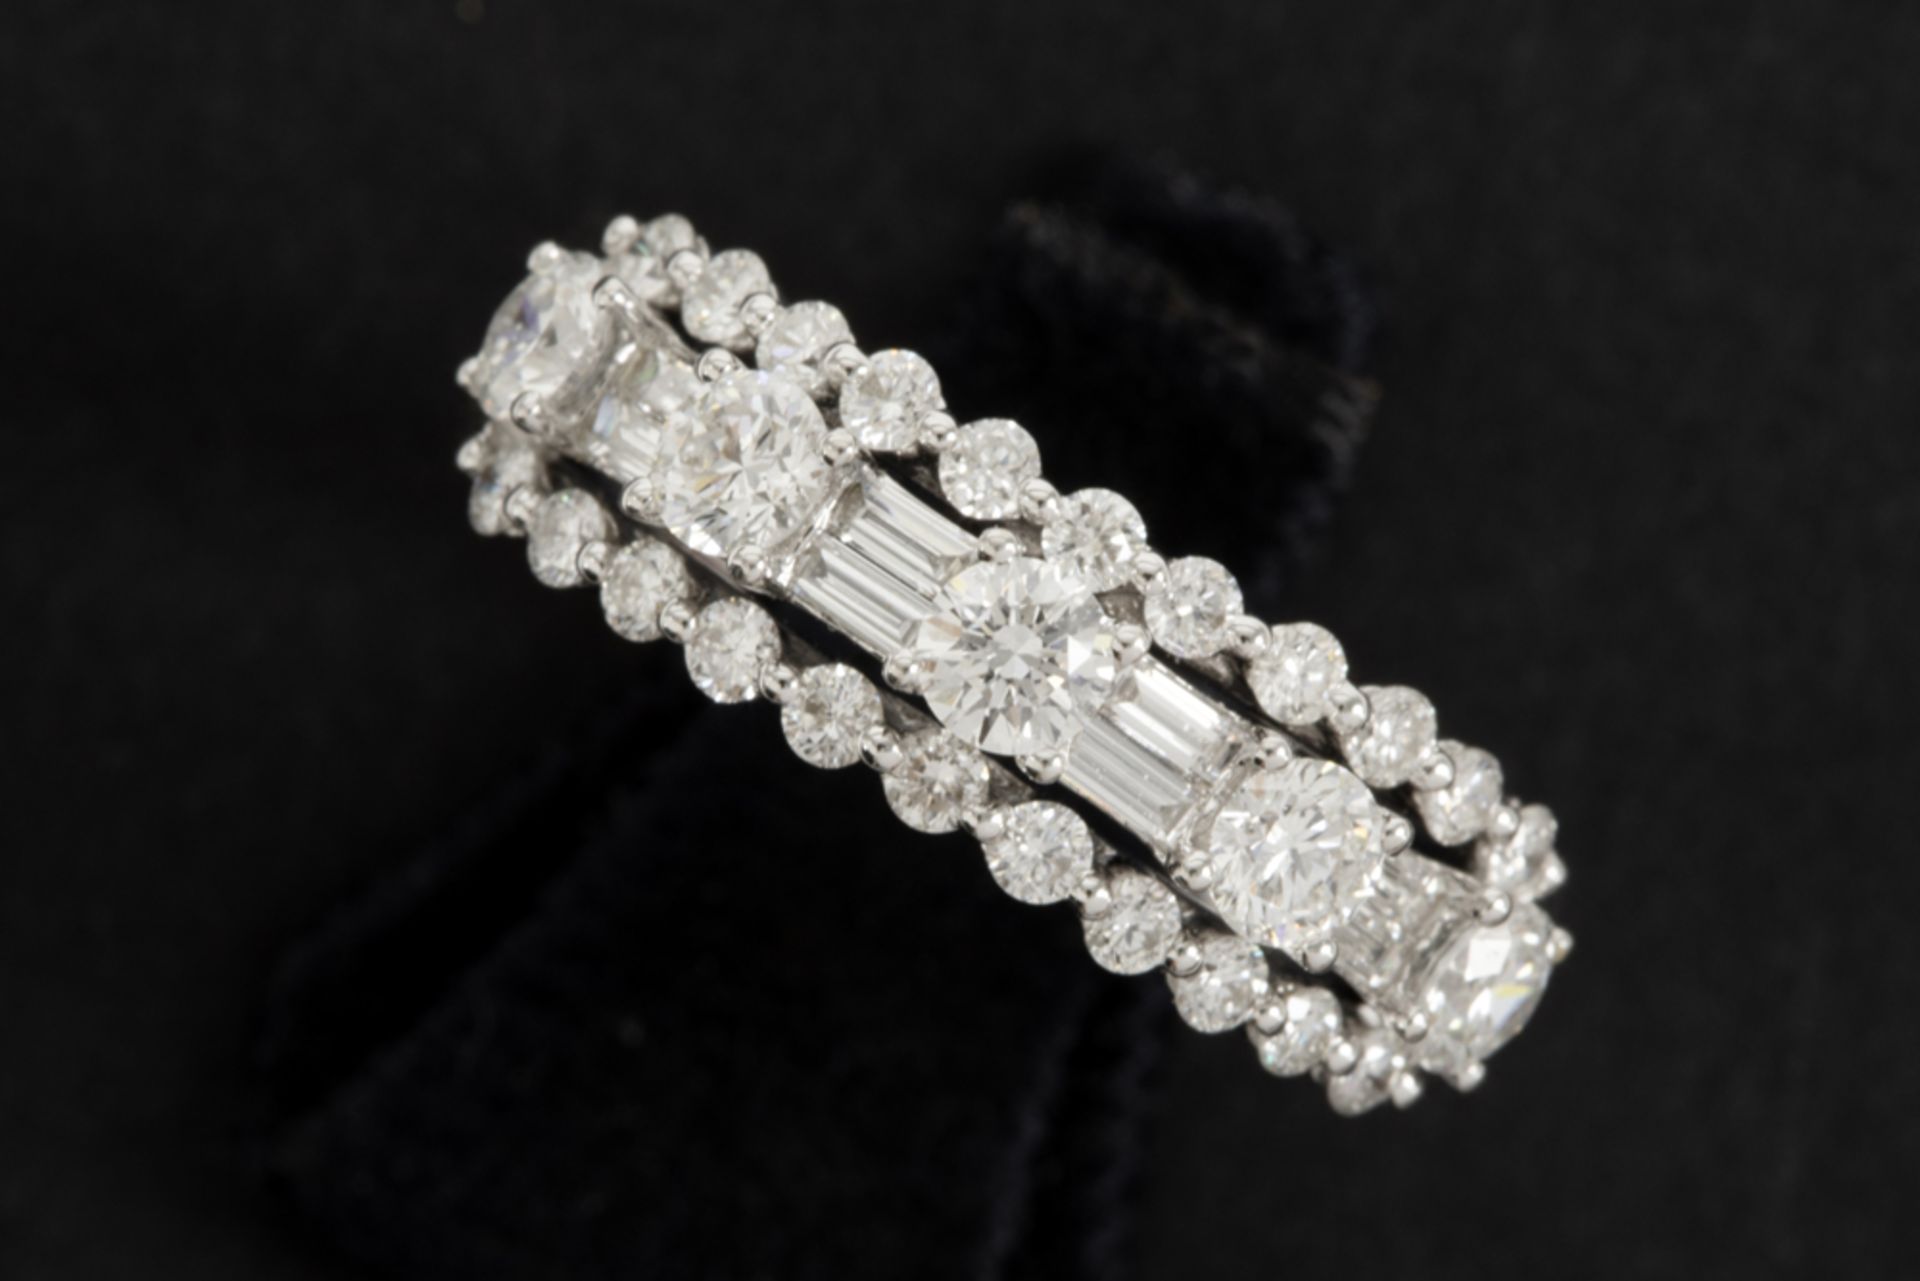 ring in white gold (18 carat) with at least 0,80 carat of high quality brilliant cut diamonds ||